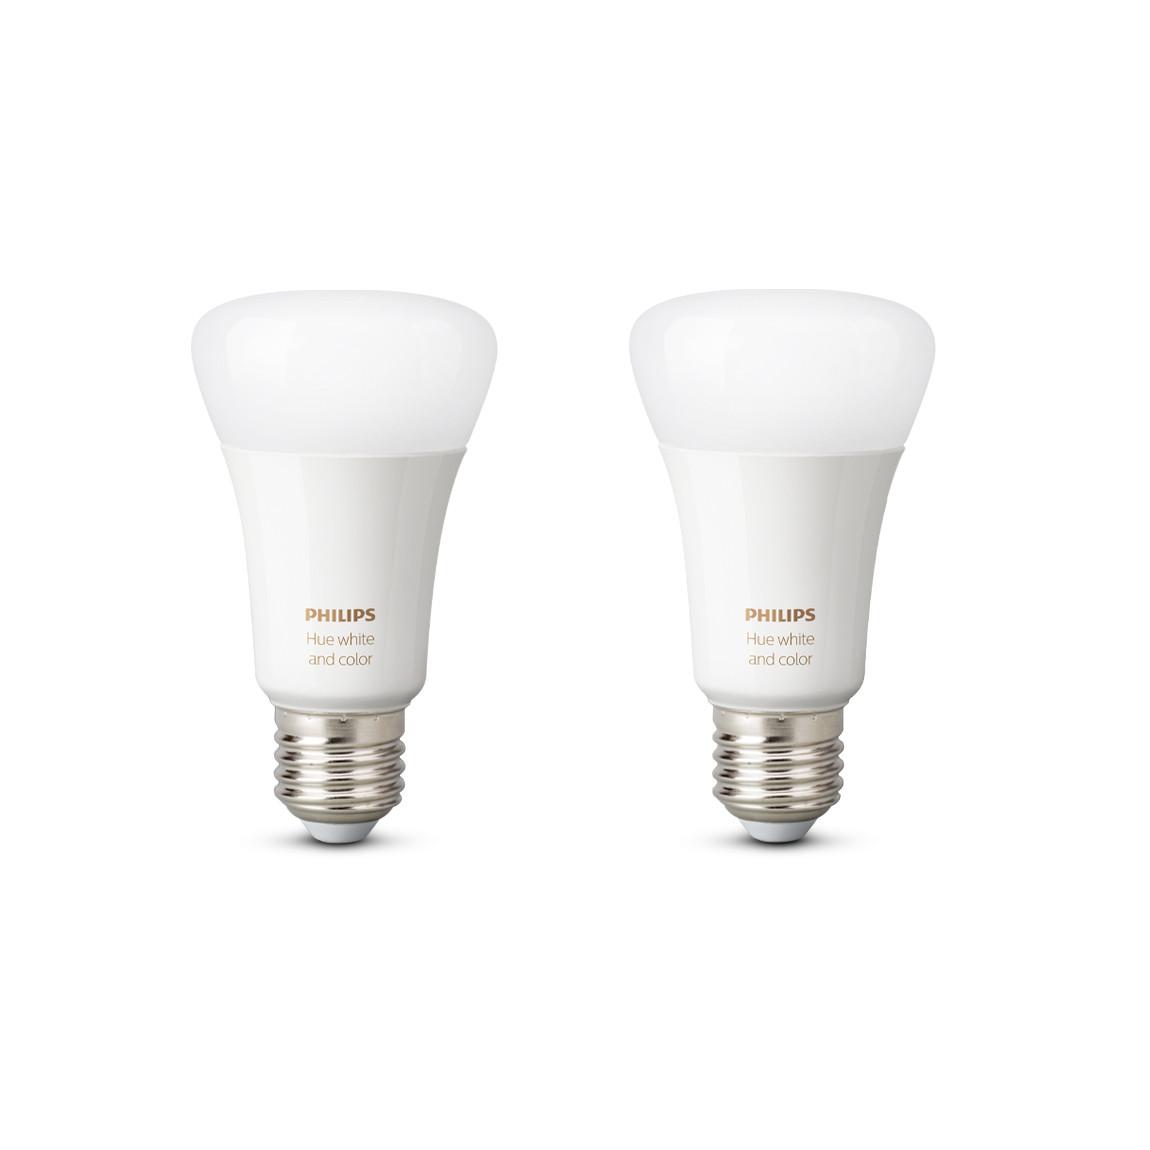 Philips Hue White and Color Ambiance E27 Bluetooth 2er-Set Licht aus frontale Ansicht